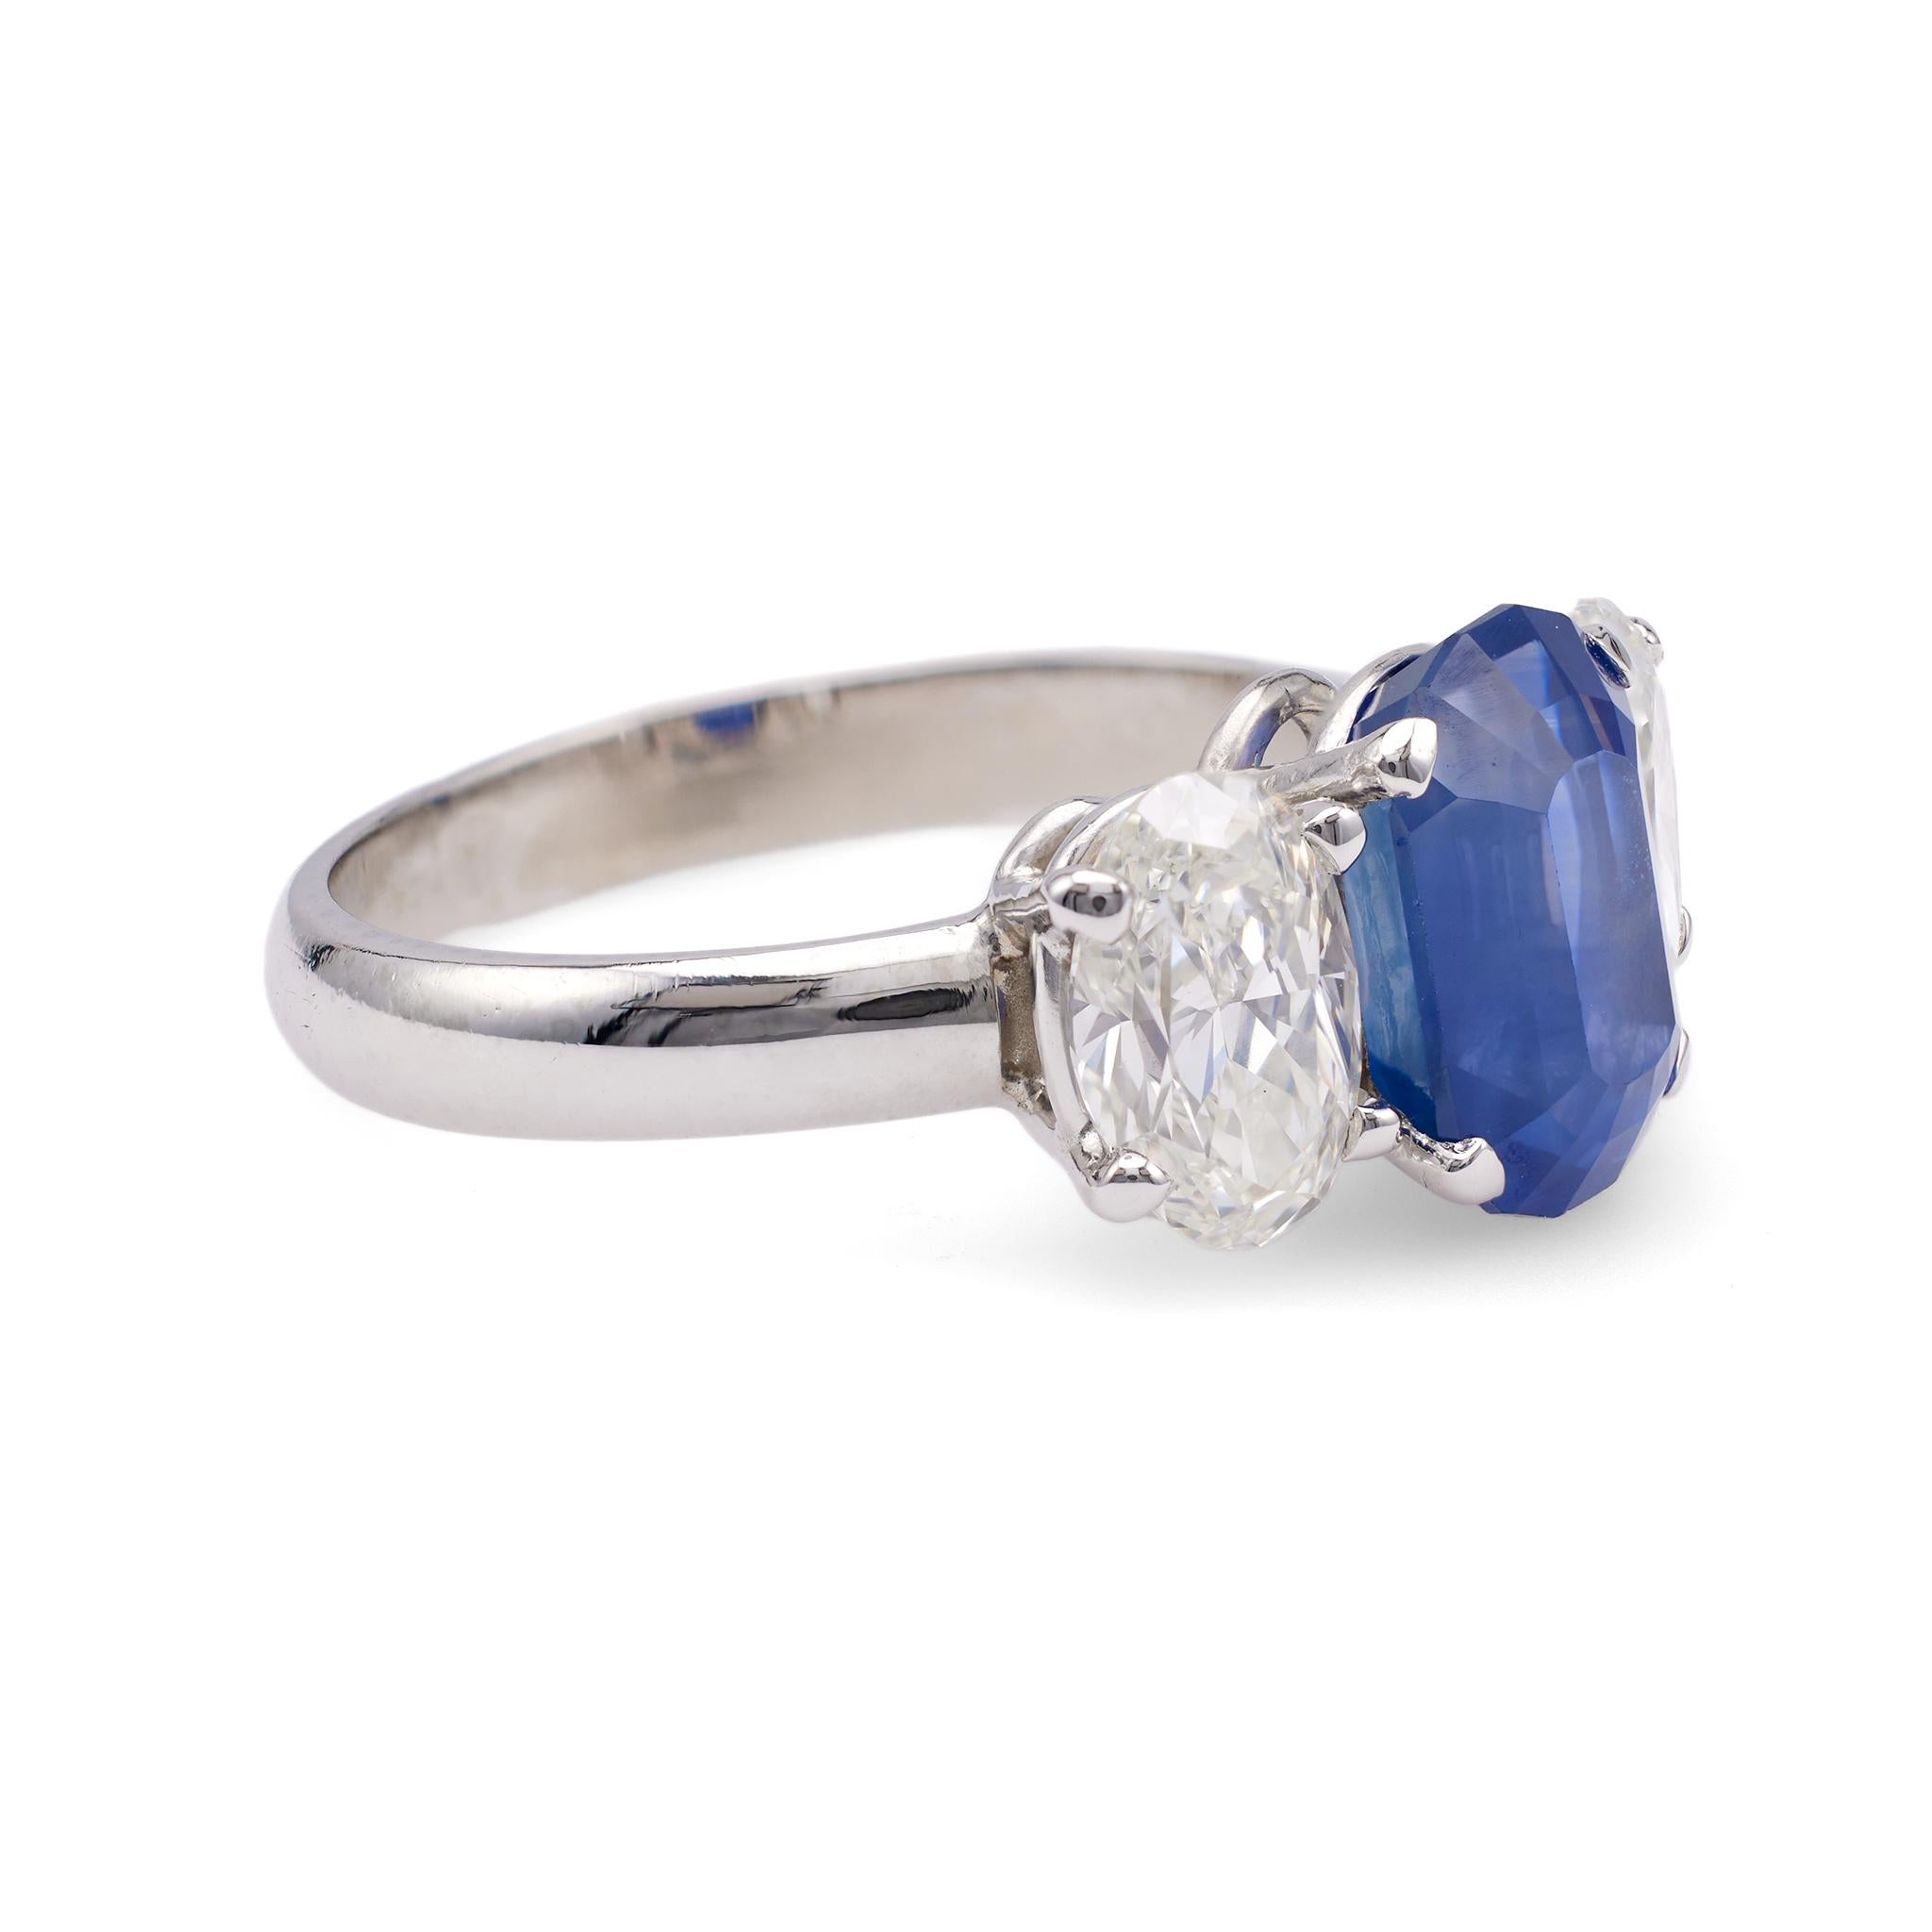 Vintage GIA 3.65 Carat Ceylon Sapphire Diamond Platinum Three Stone Ring In Excellent Condition For Sale In Beverly Hills, CA